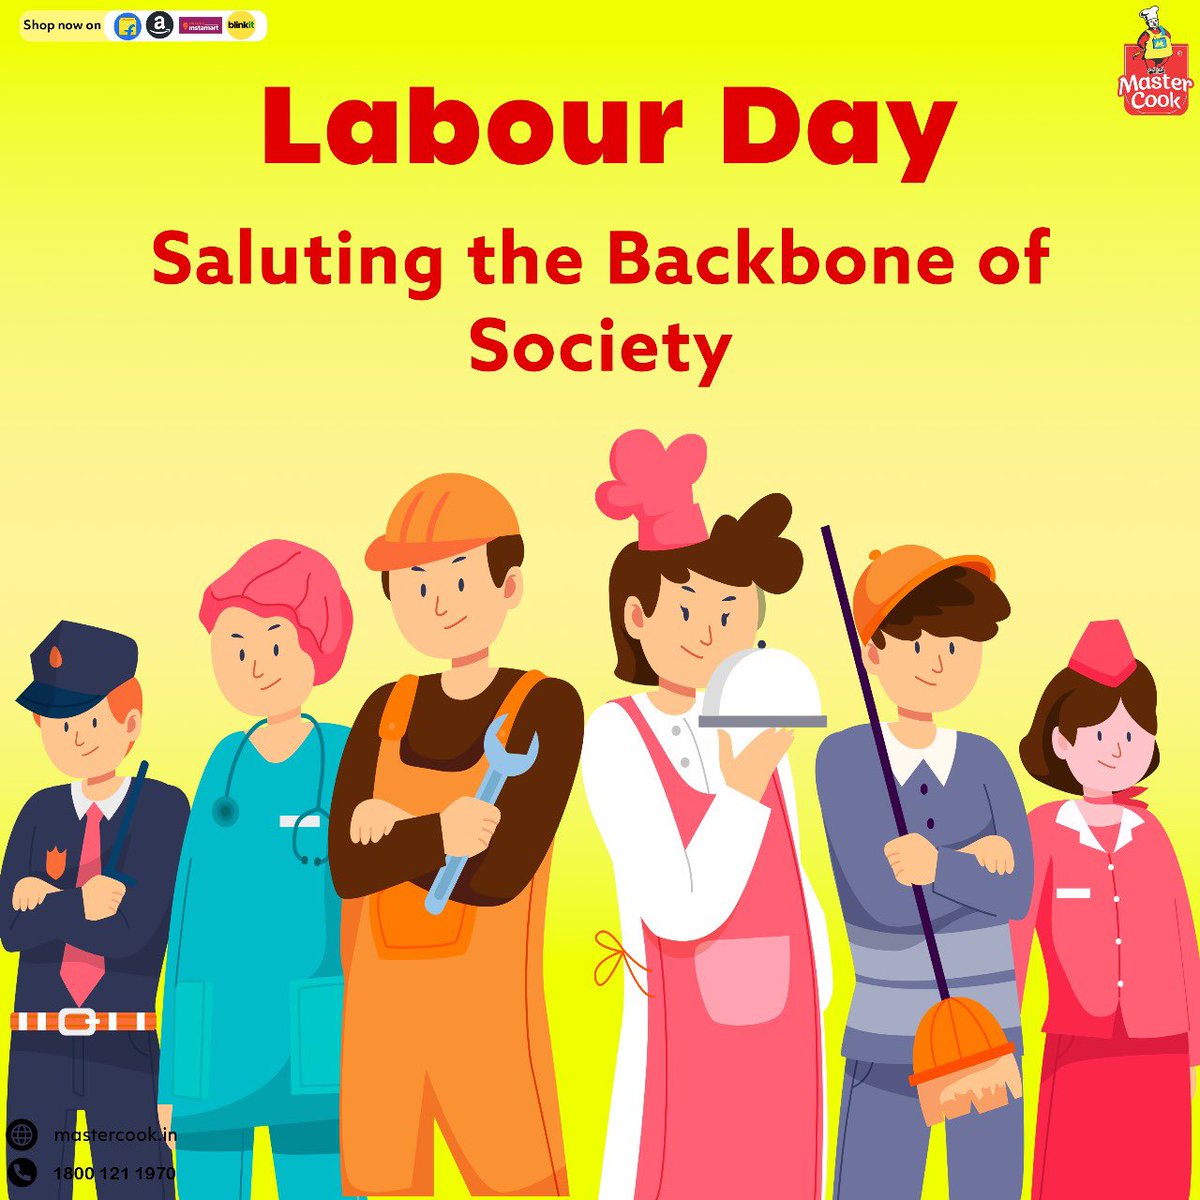 Celebrating the dedication and resilience of workers worldwide. #labourday #viralpost #foryou #viralpage #labourdayweekend